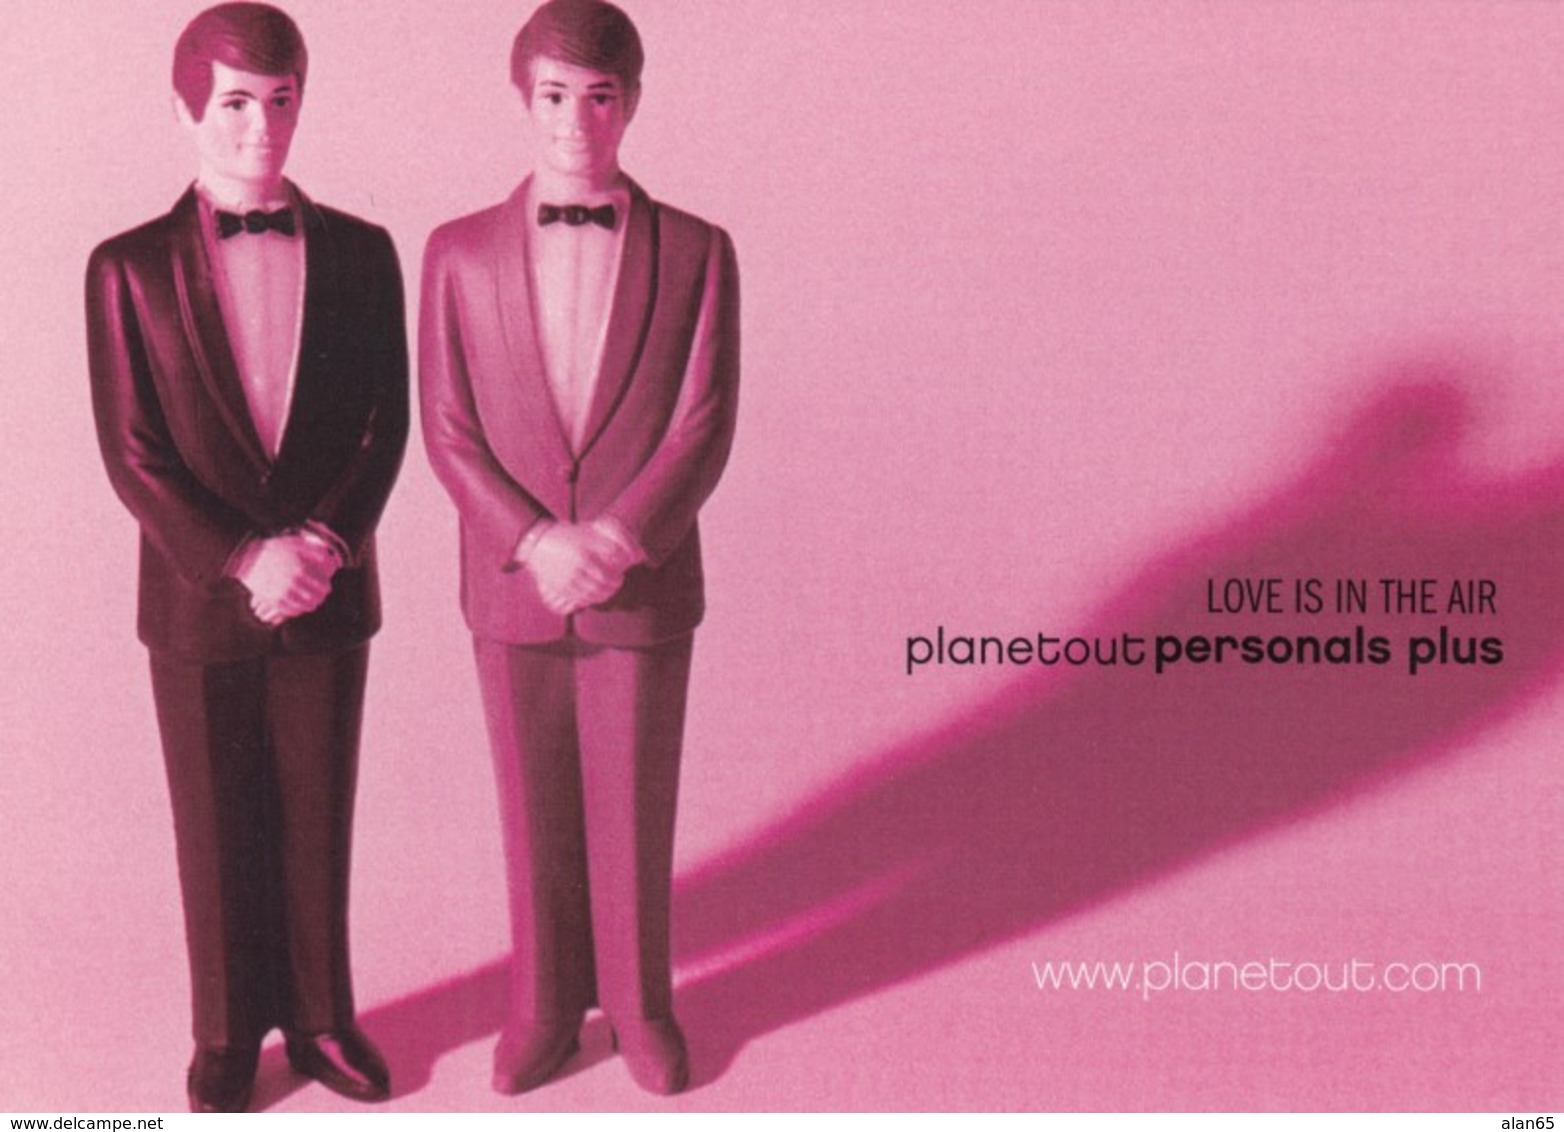 'Planetout' Gay Lesbian Personal Ad Website Advertisement, Gay Marriage Theme C2000s Vintage Max Rack Postcard - Advertising